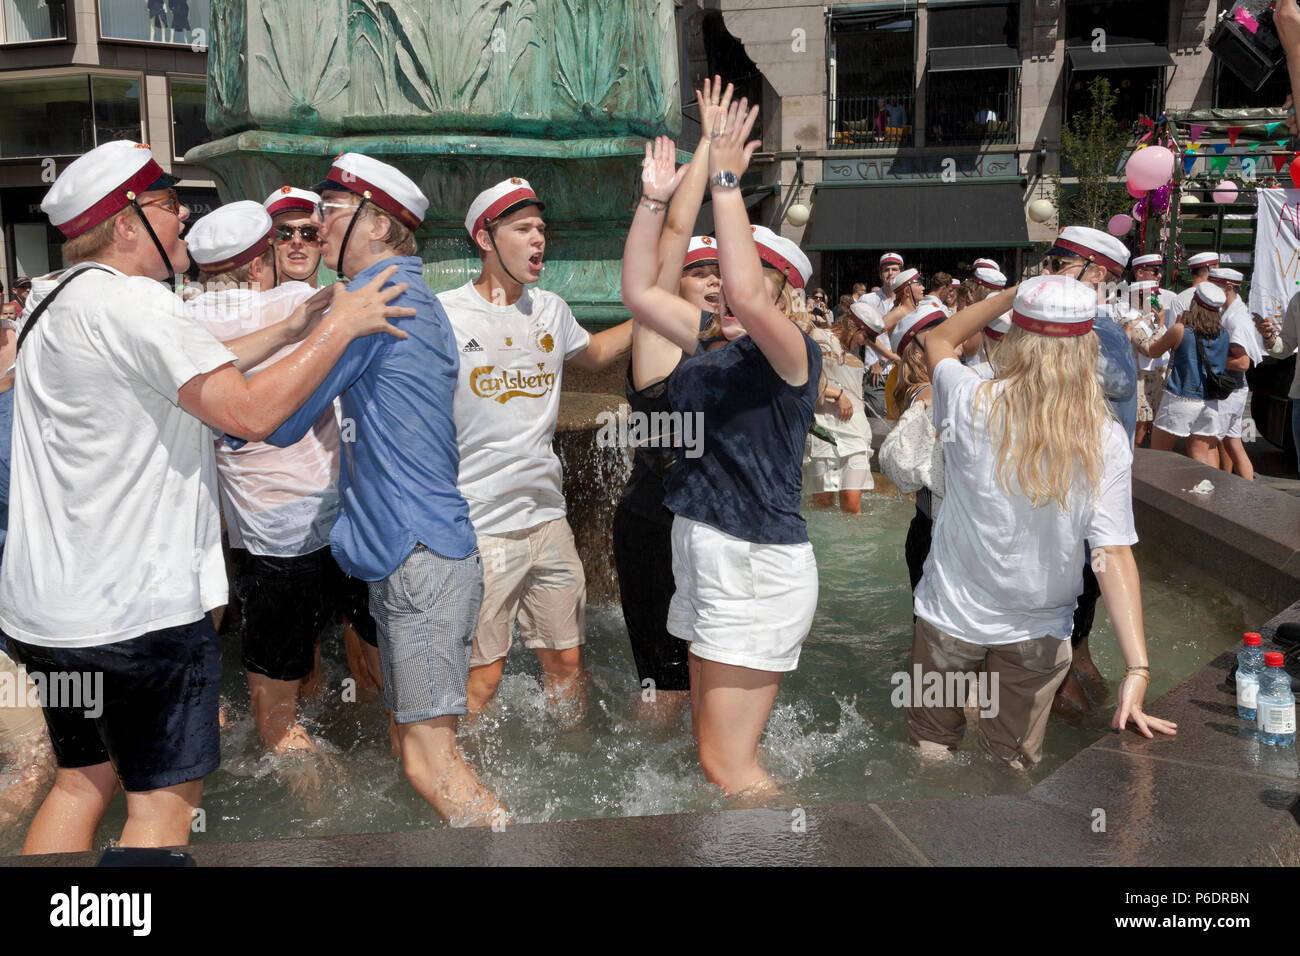 Copenhagen, Denmark. June 29, 2018. Happy, Danish students celebrate their high school, grammar school graduation and take the plunge. A dance around and a dip or dive into the cold water of the Stork Fountain (Storkespringvandet) on the pedestrian street, Stroeget, is a traditional element on the day of celebration for  graduated students in Greater Copenhagen. It is often part of the long, exhausting and high-spirited truck tour visiting each student’s home for refreshments. Credit: Niels Quist/Alamy Live News Stock Photo